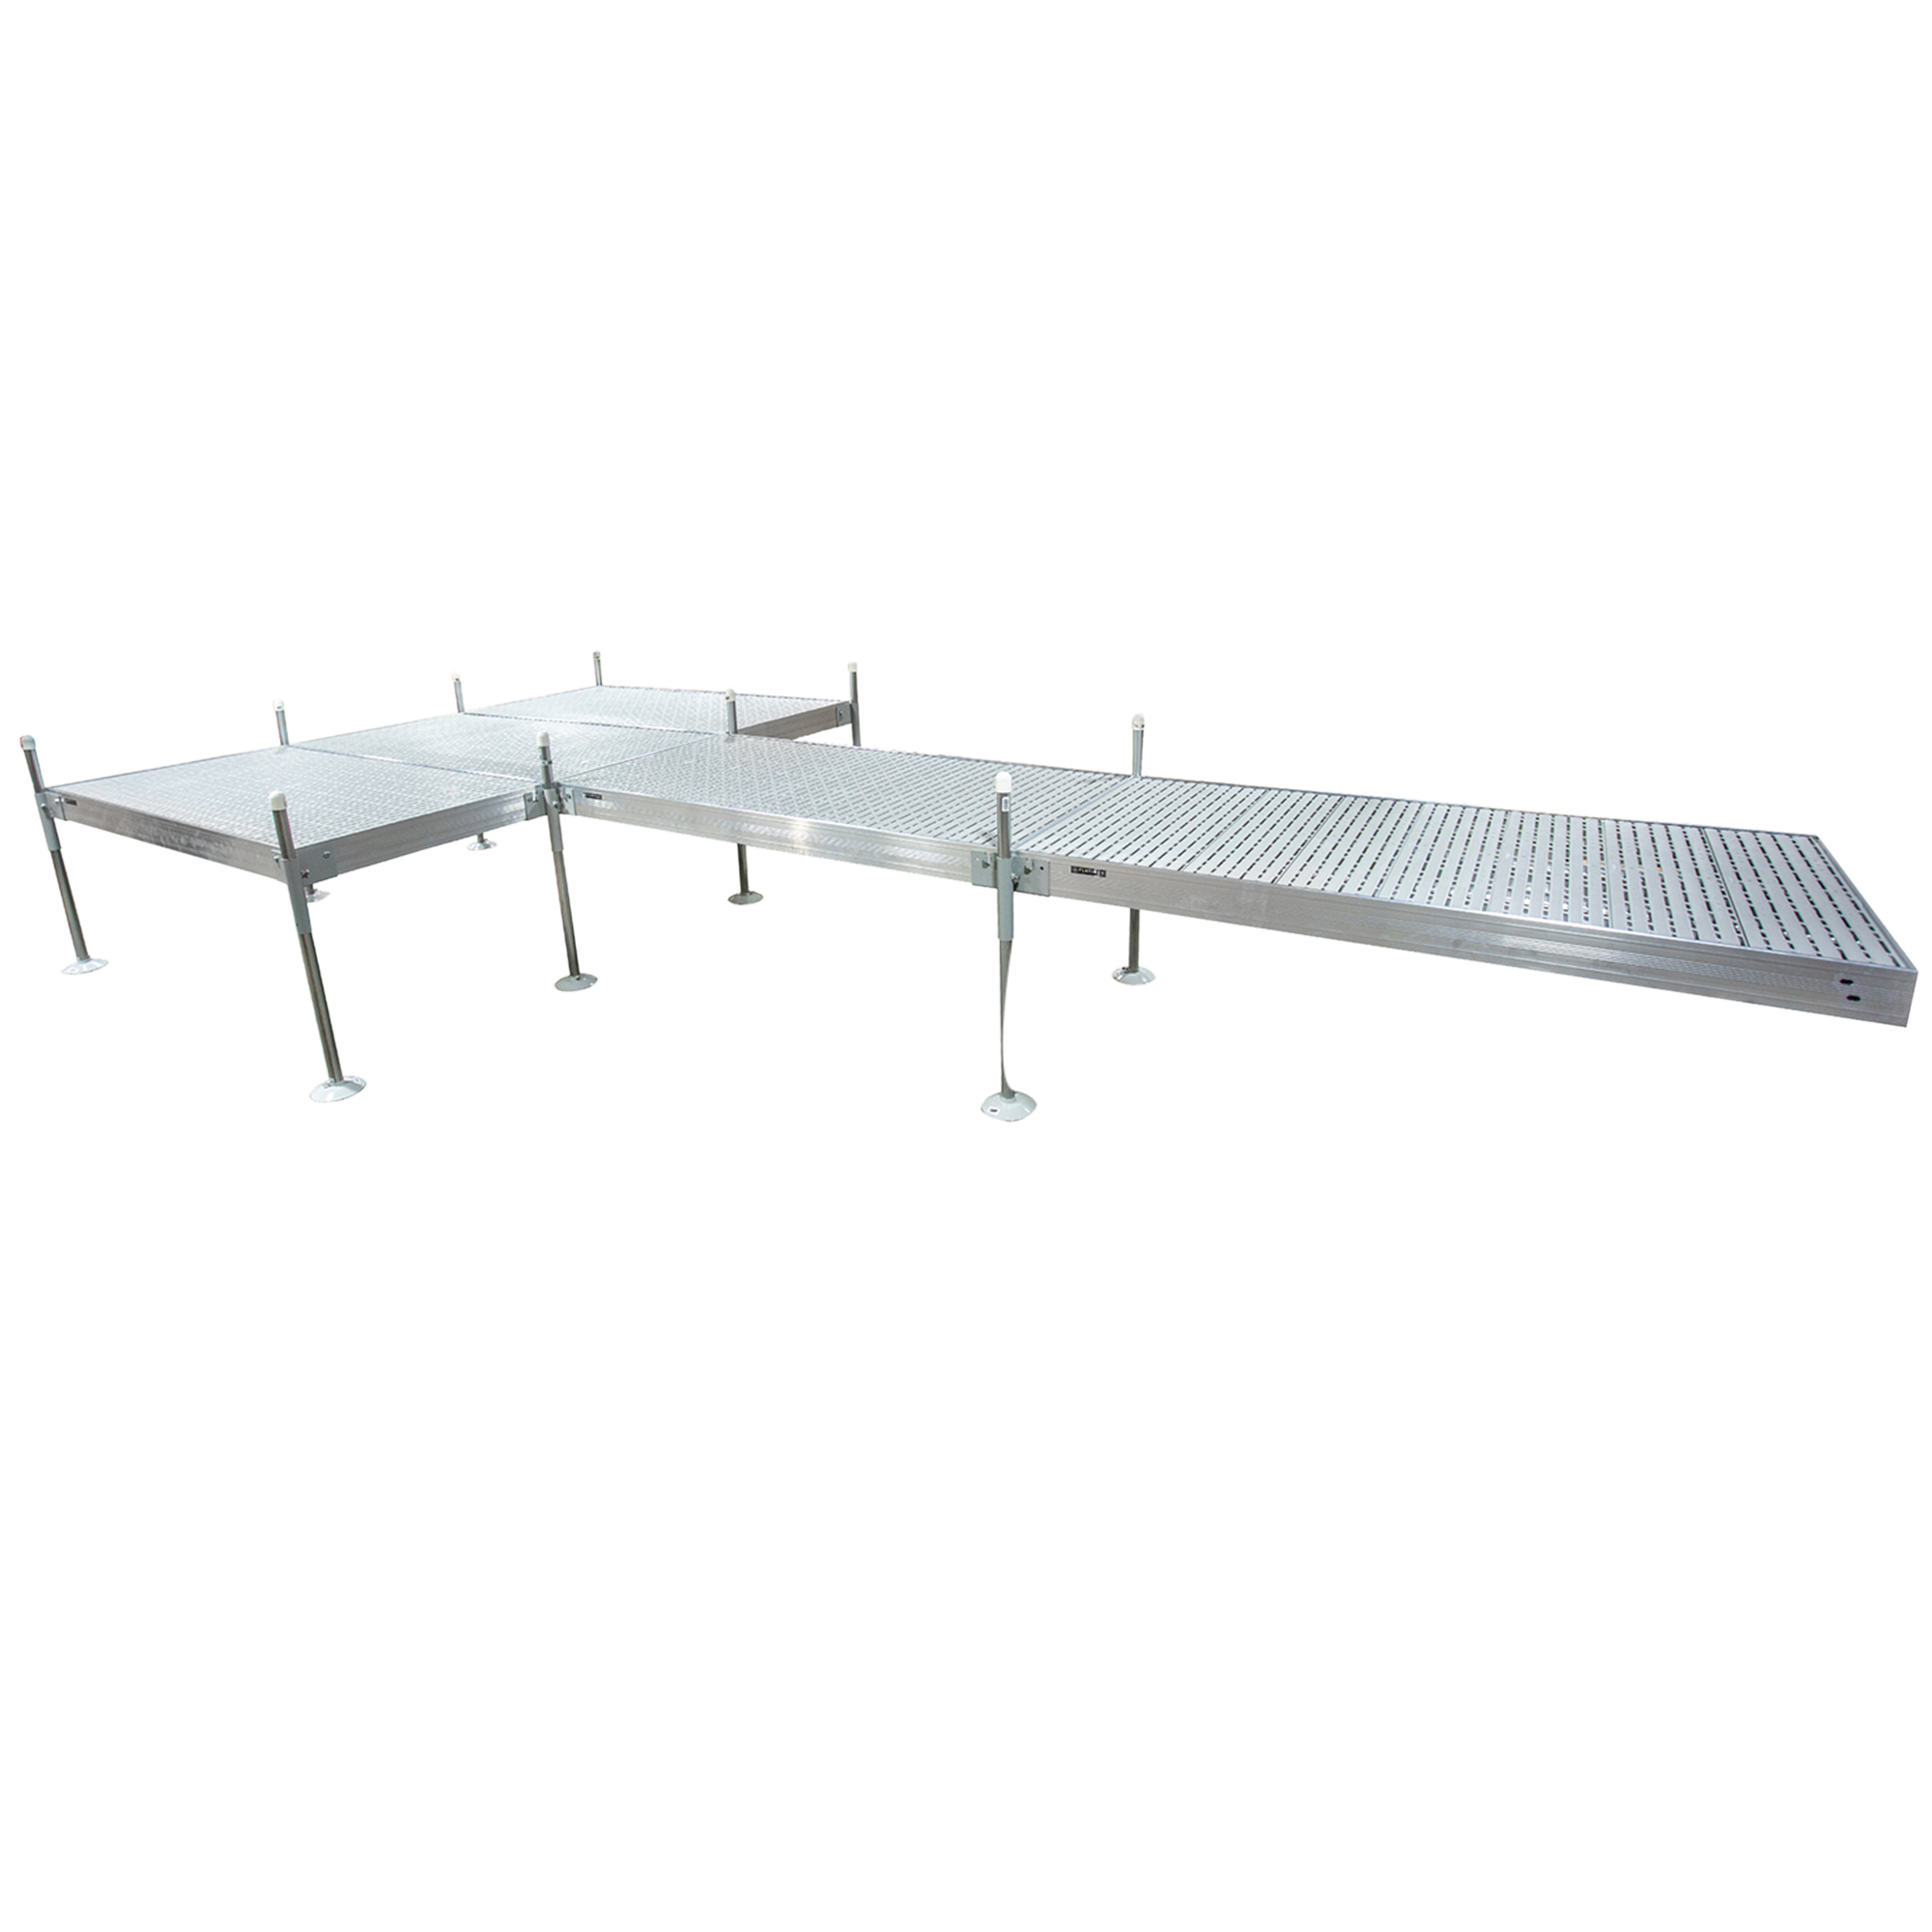 24' Platform Boat Dock System with Aluminum Frame and Gray Titan Decking